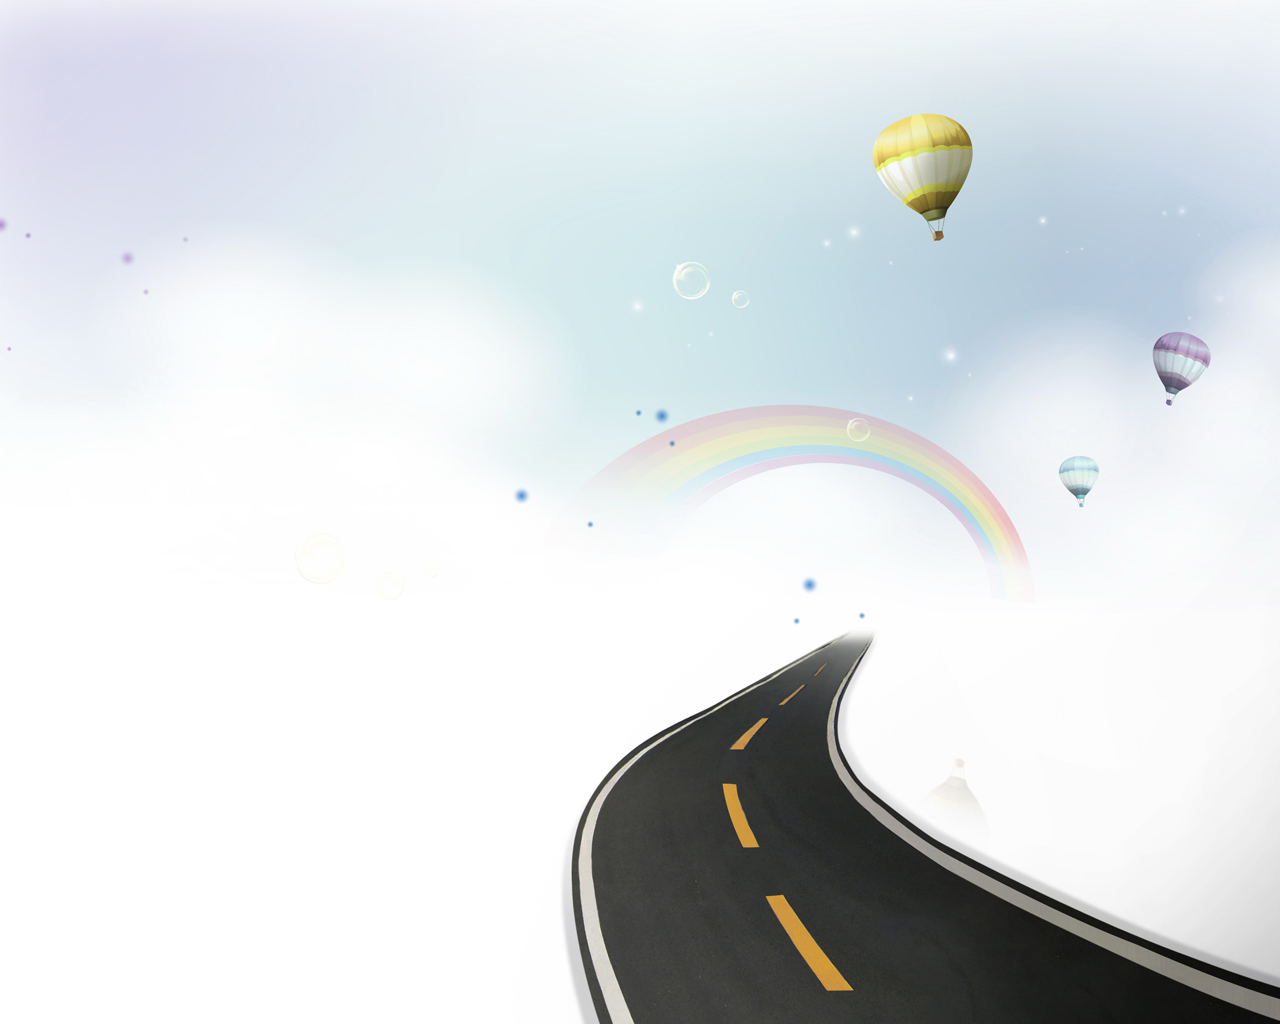 Sky Road with Flying Balloons backgrounds